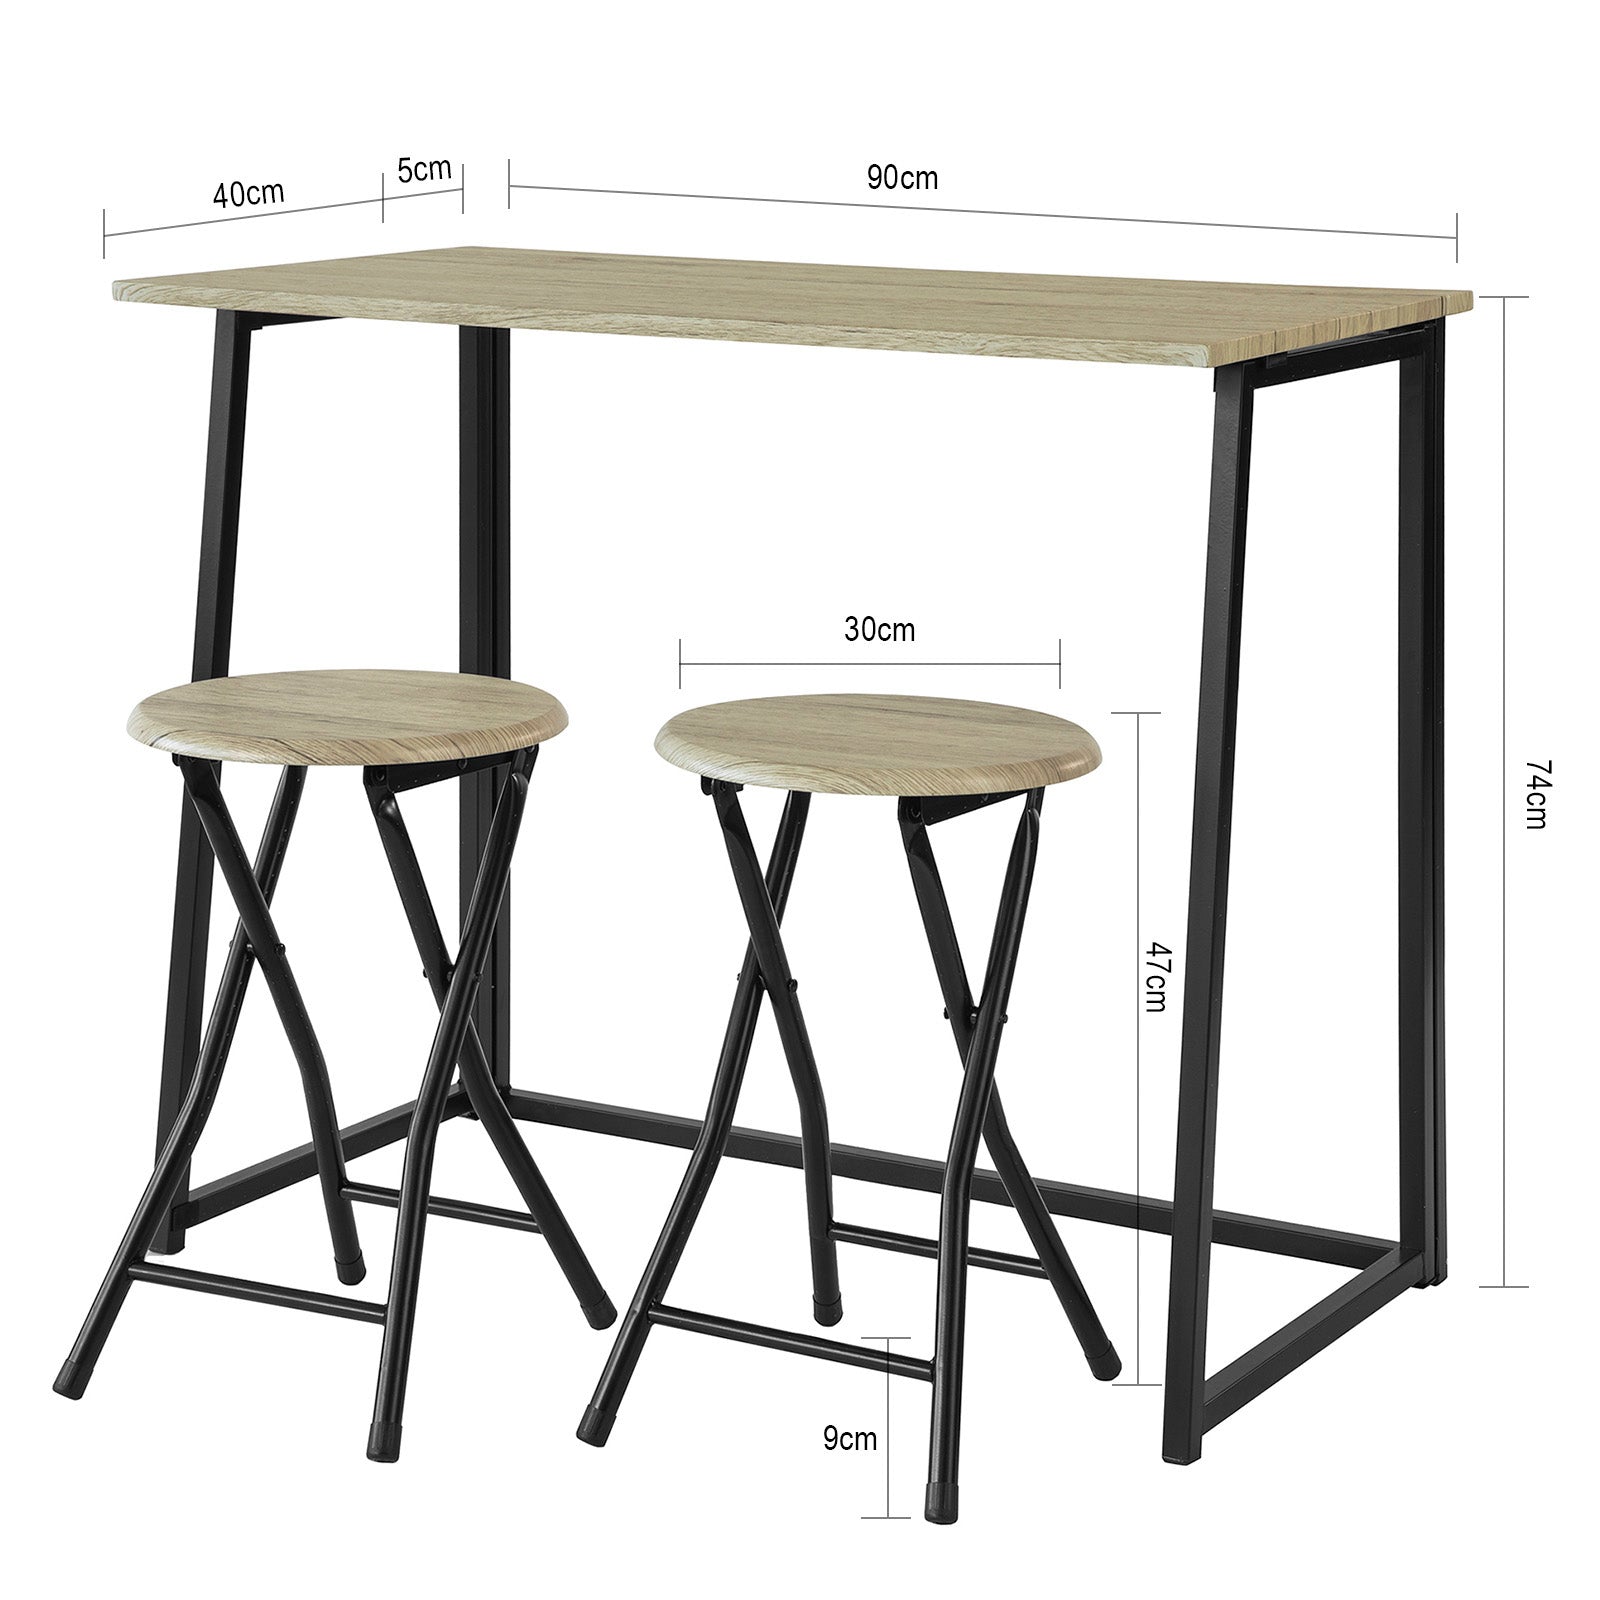 SoBuy OGT18-N, 3 Piece Dining Set,Dining Table with 4Stools,Home Kitchen Breakfast Table,Bar Table Set, Bar Table with 2 Bar Stools,Kitchen Counter with Bar Chairs